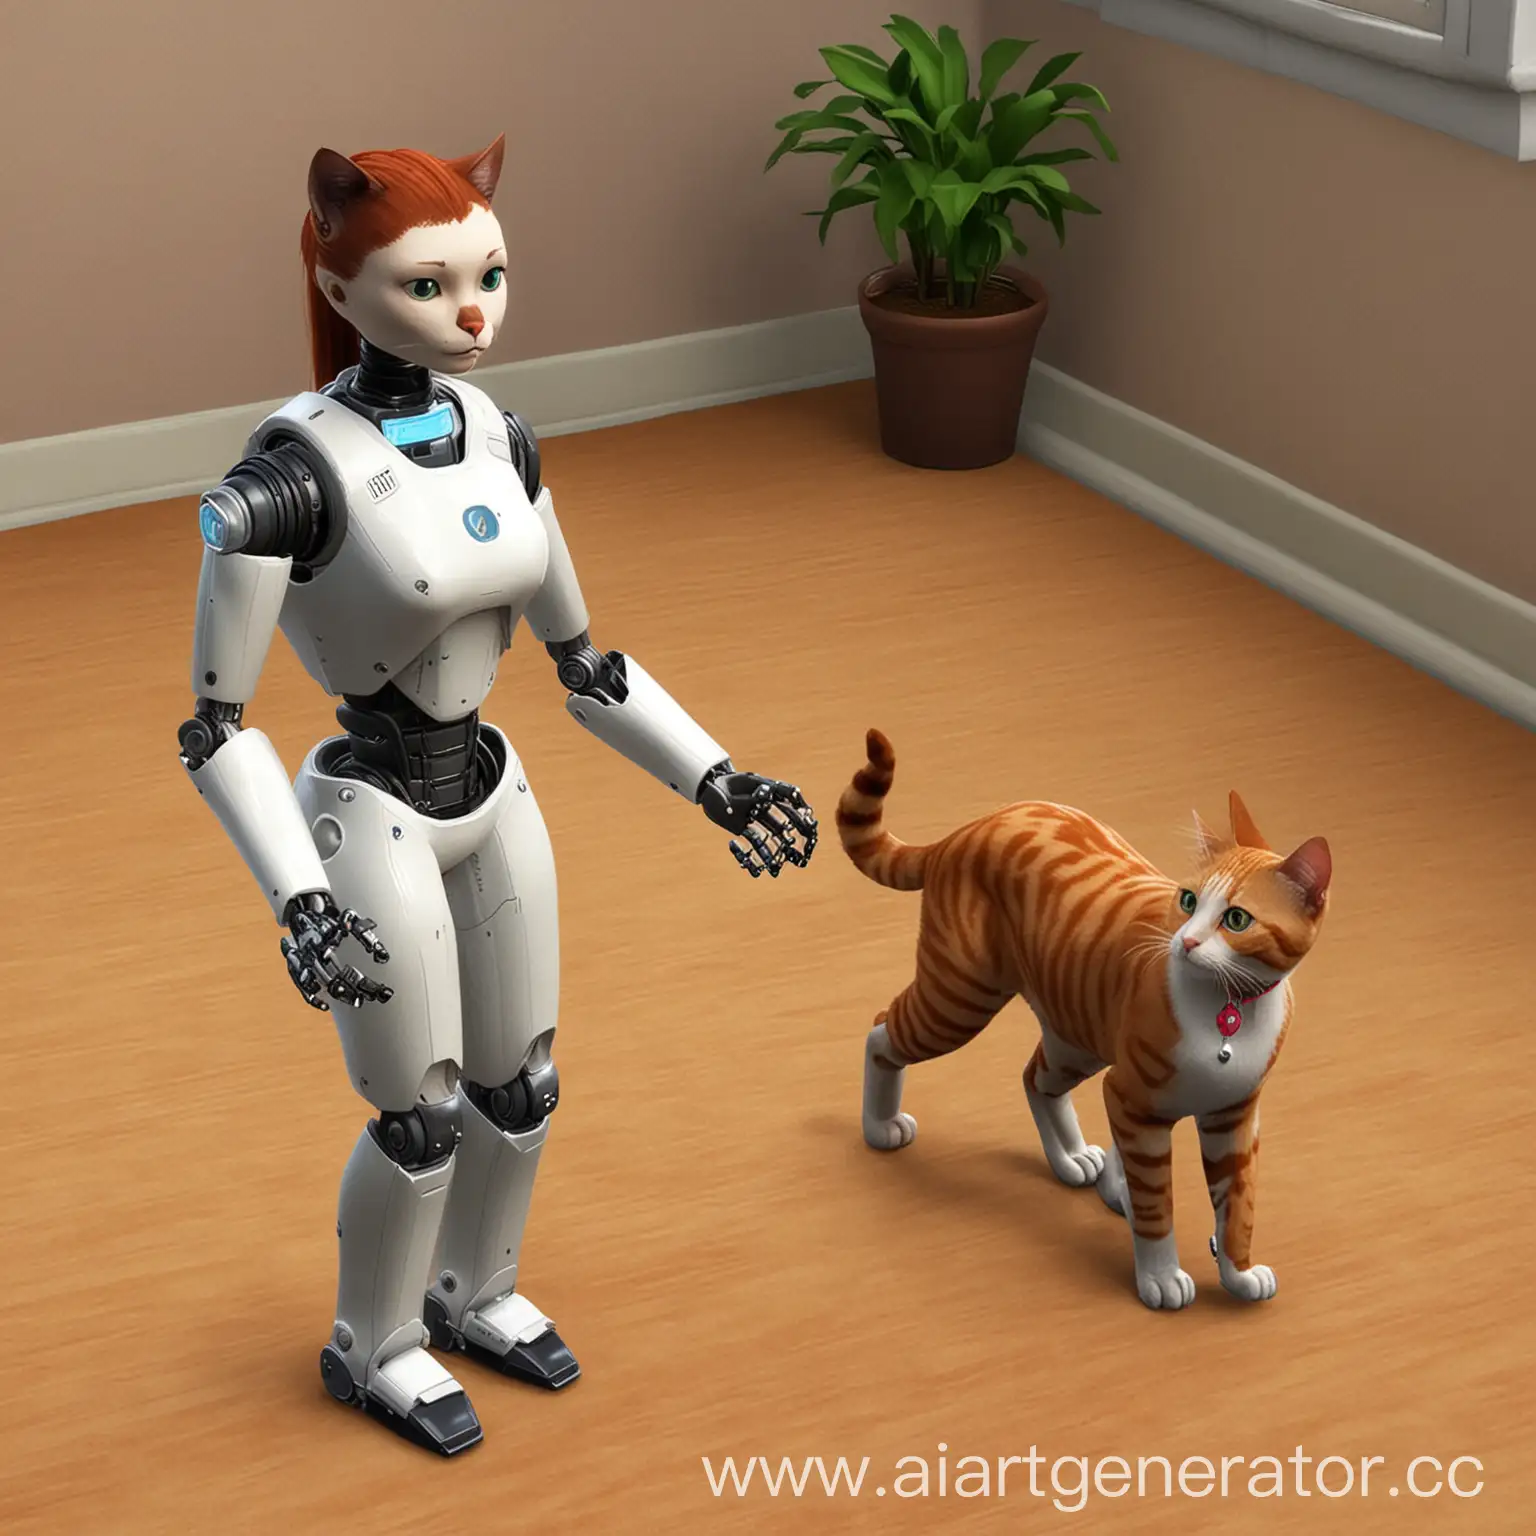 Robot-Playing-with-Cat-in-Virtual-Reality-Simulation